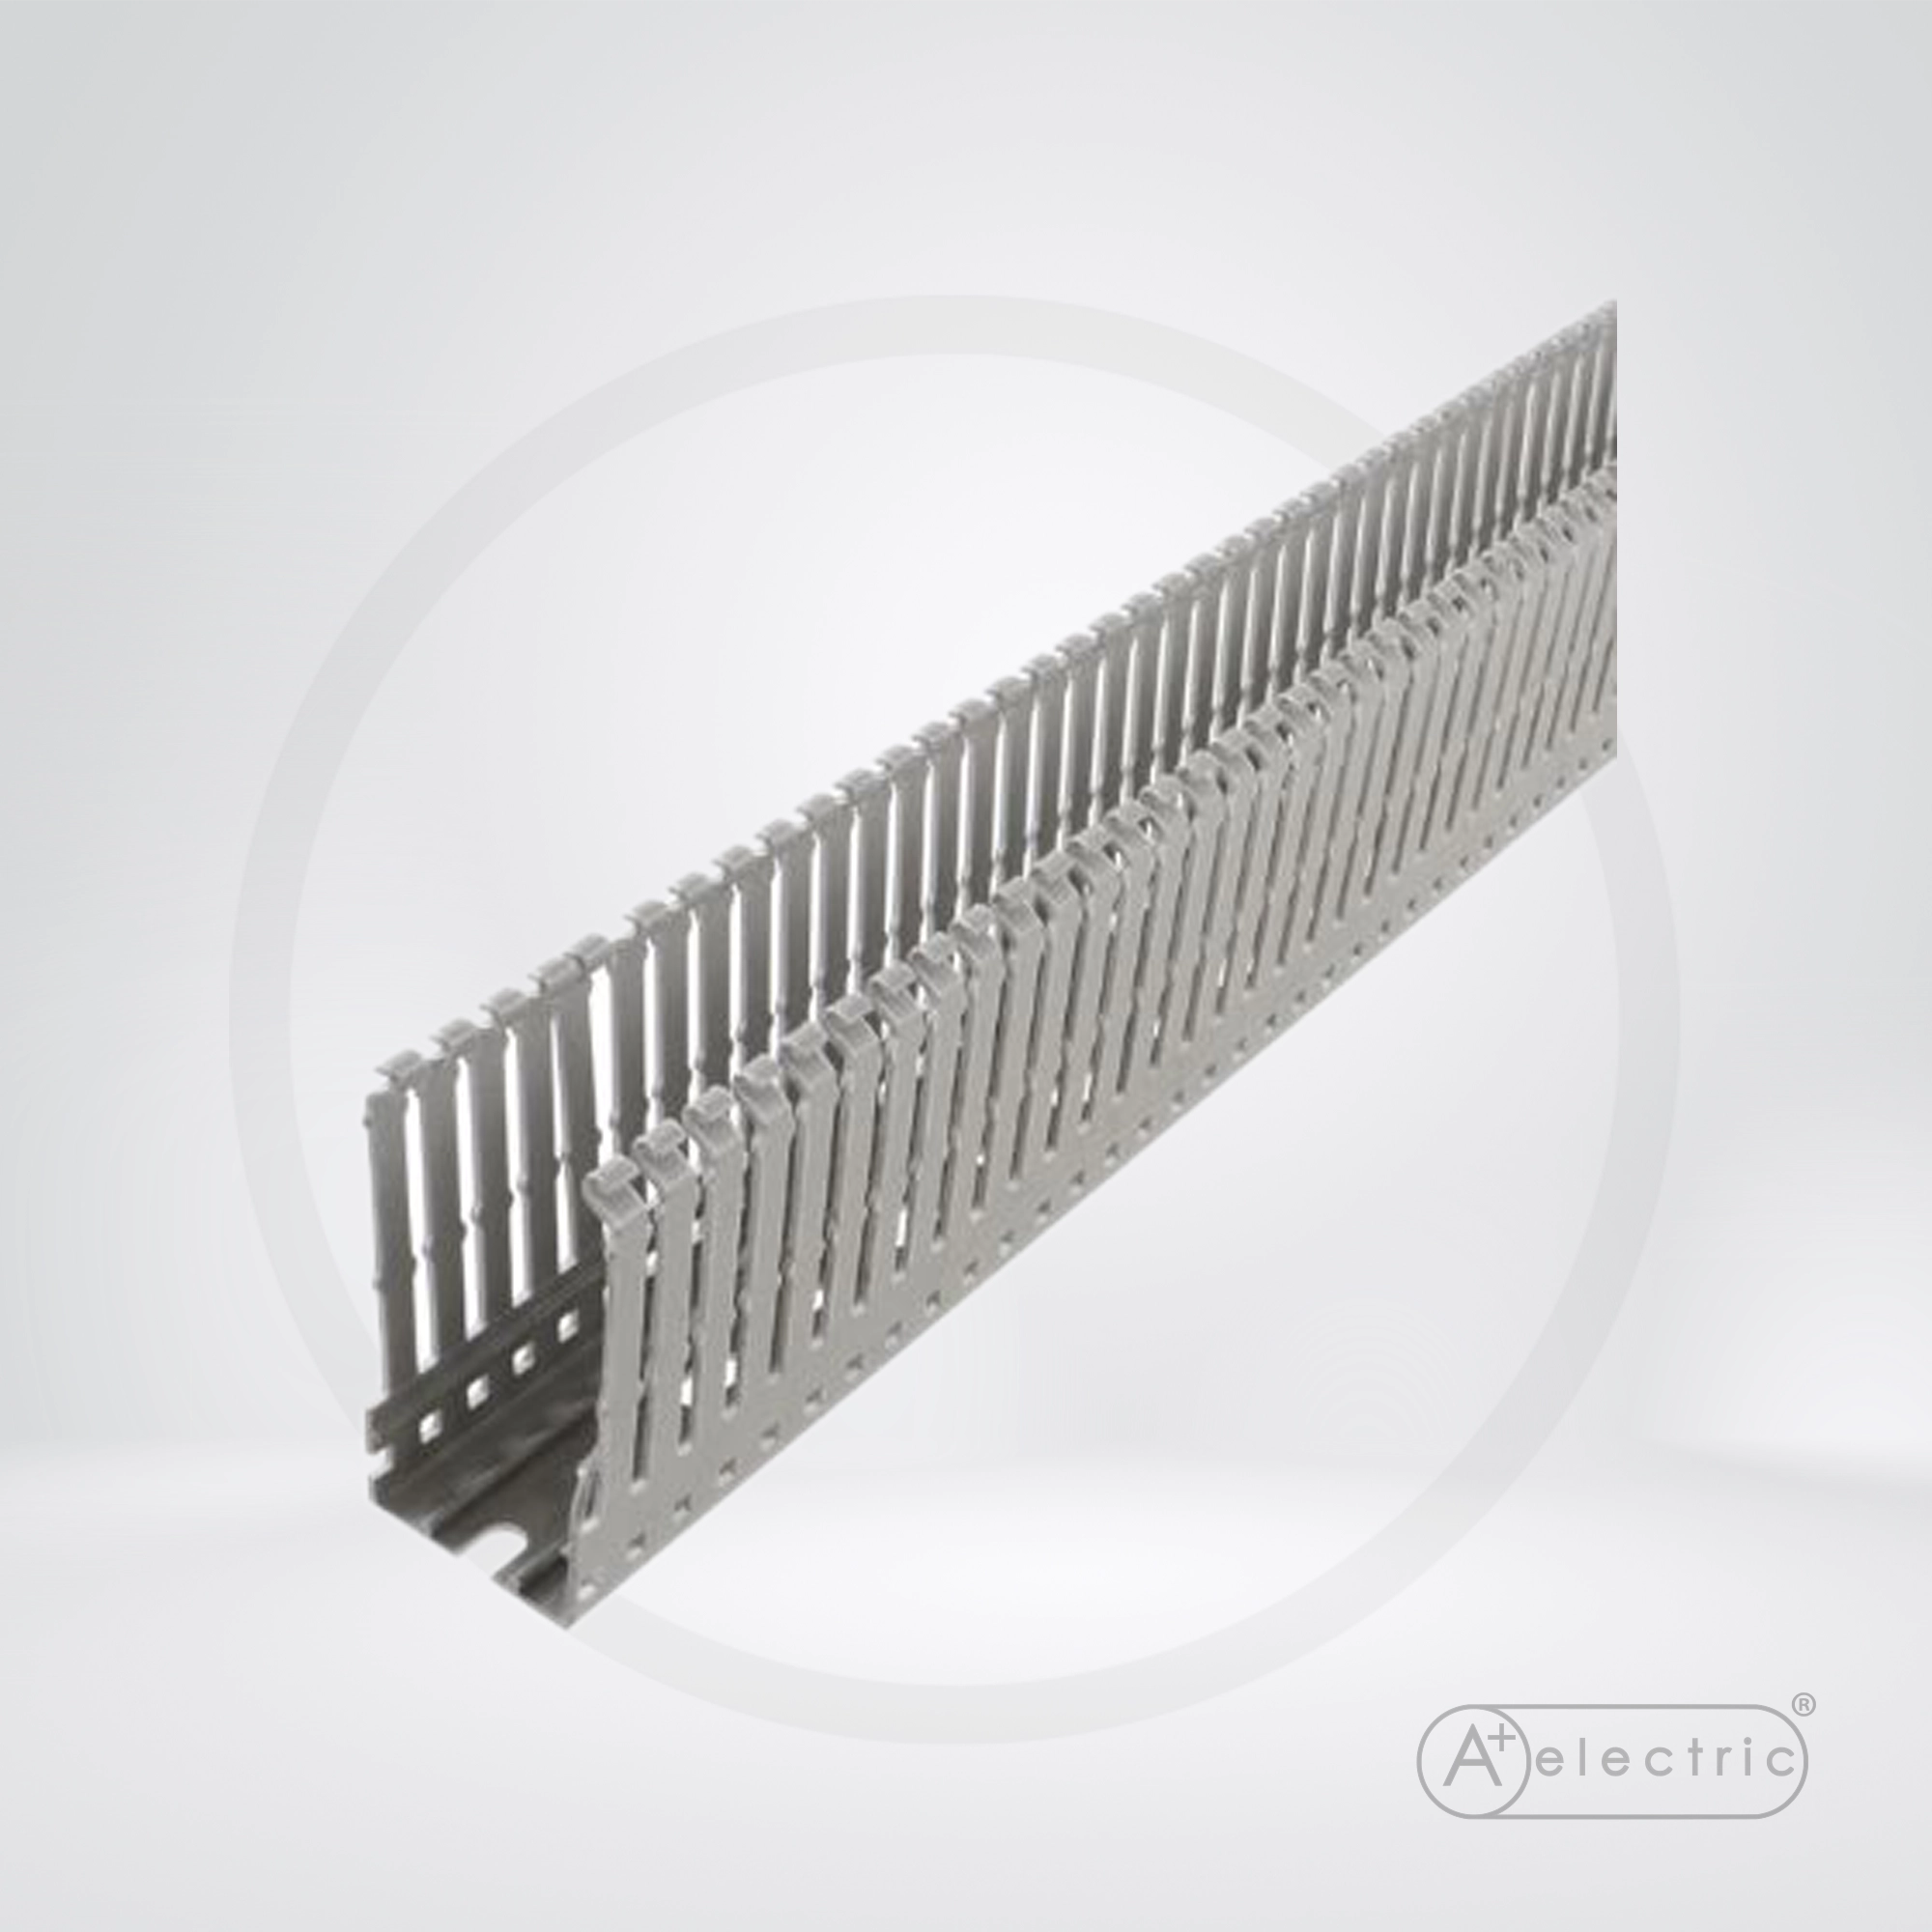 40x60 Slotted Type Cable Trunking - A Plus Plastic & Electric